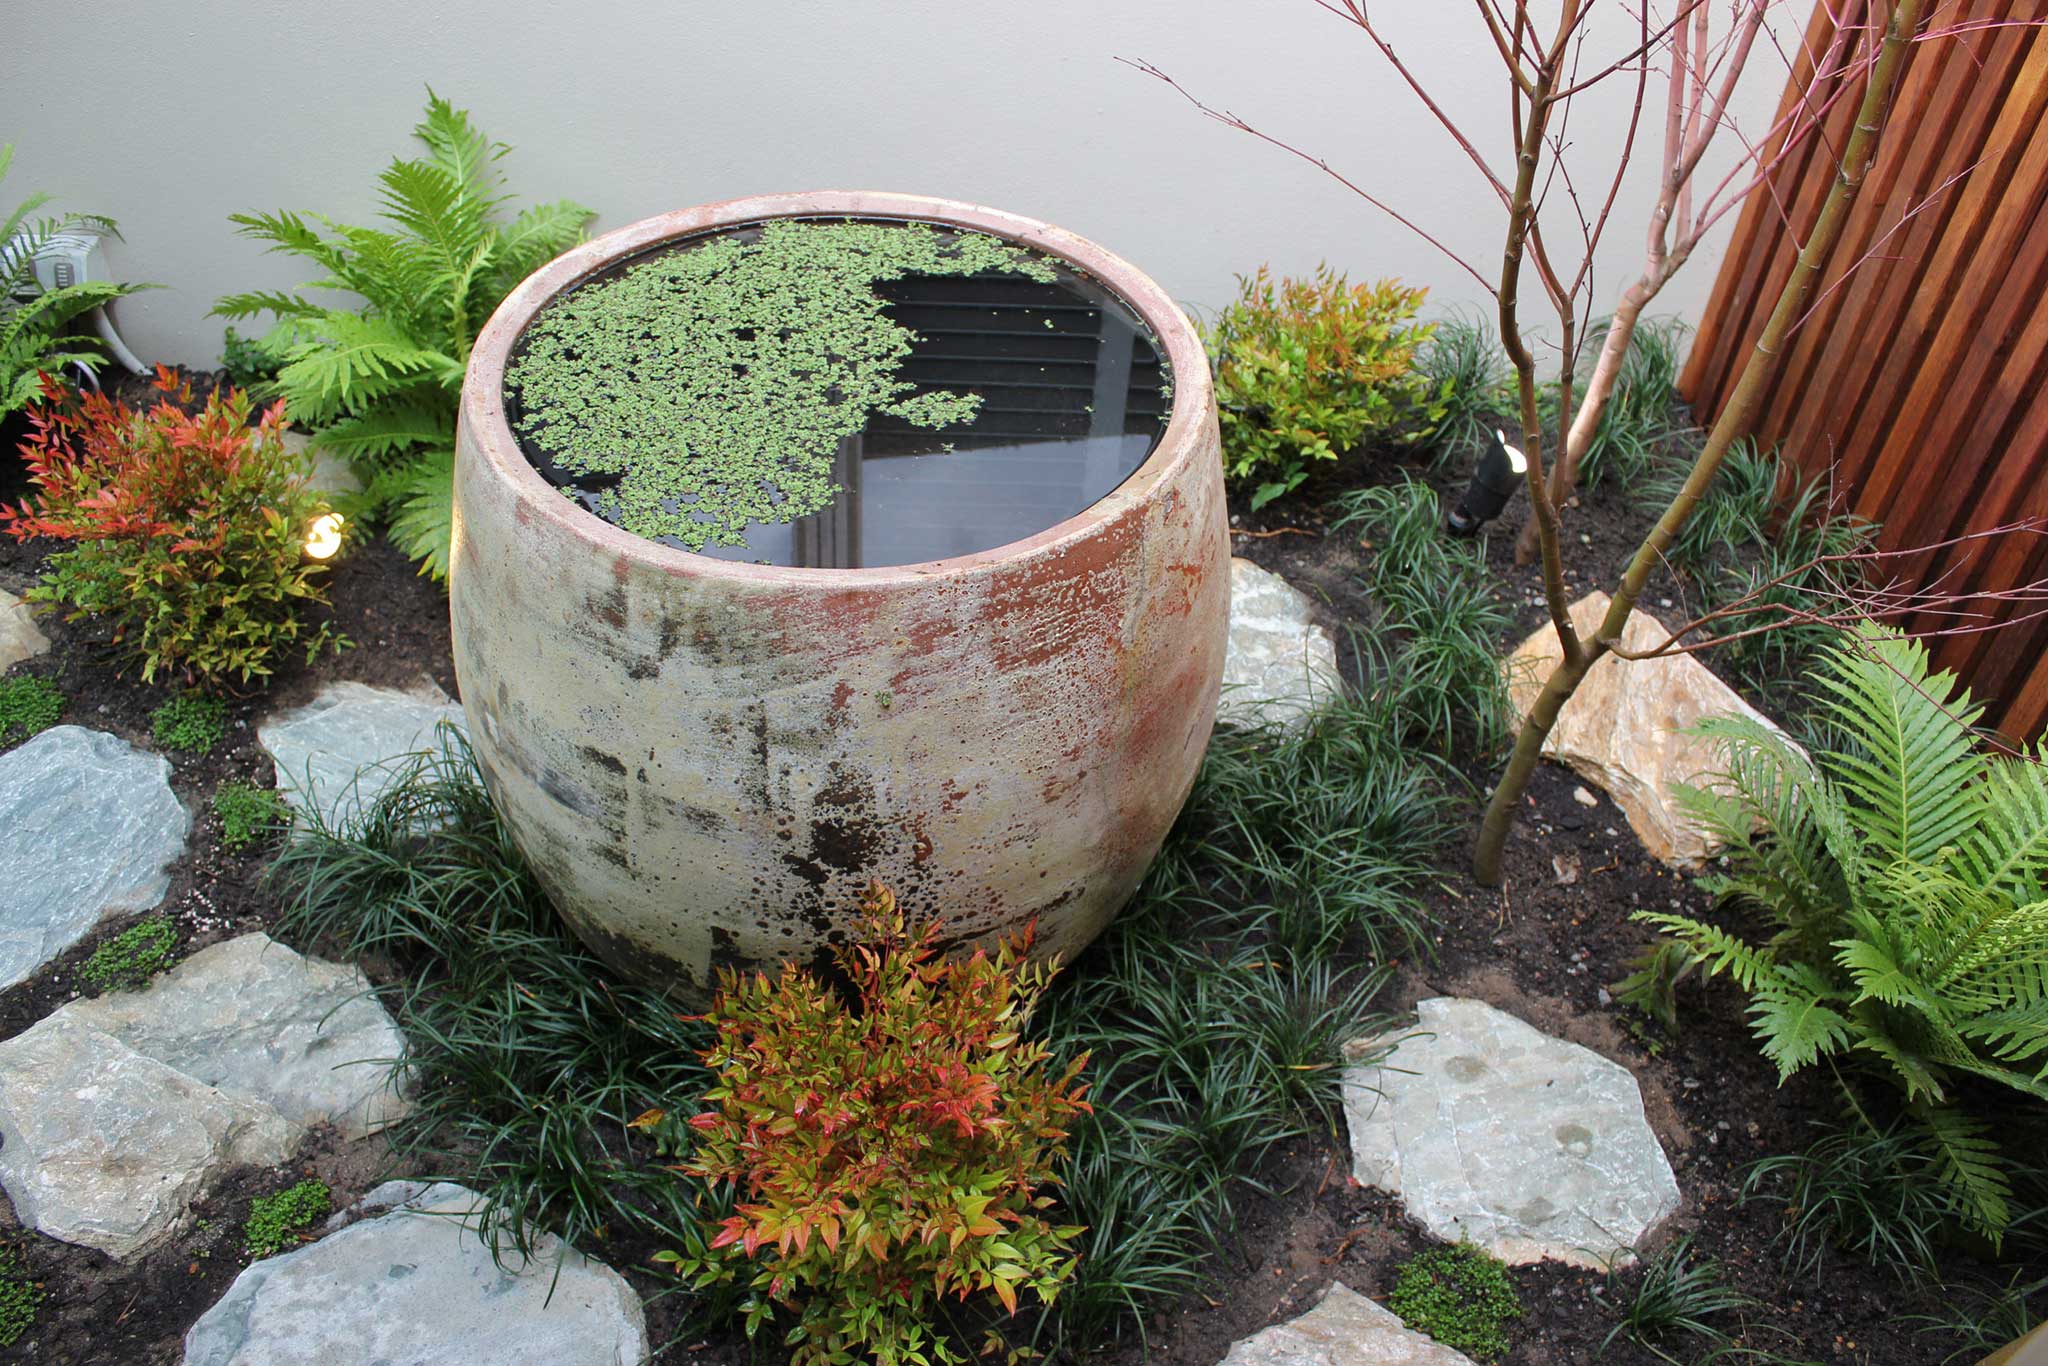 Landscape Design Construction Central Coast - Project "Nook Munday" - Atrium Courtyard with urn water feature and planting